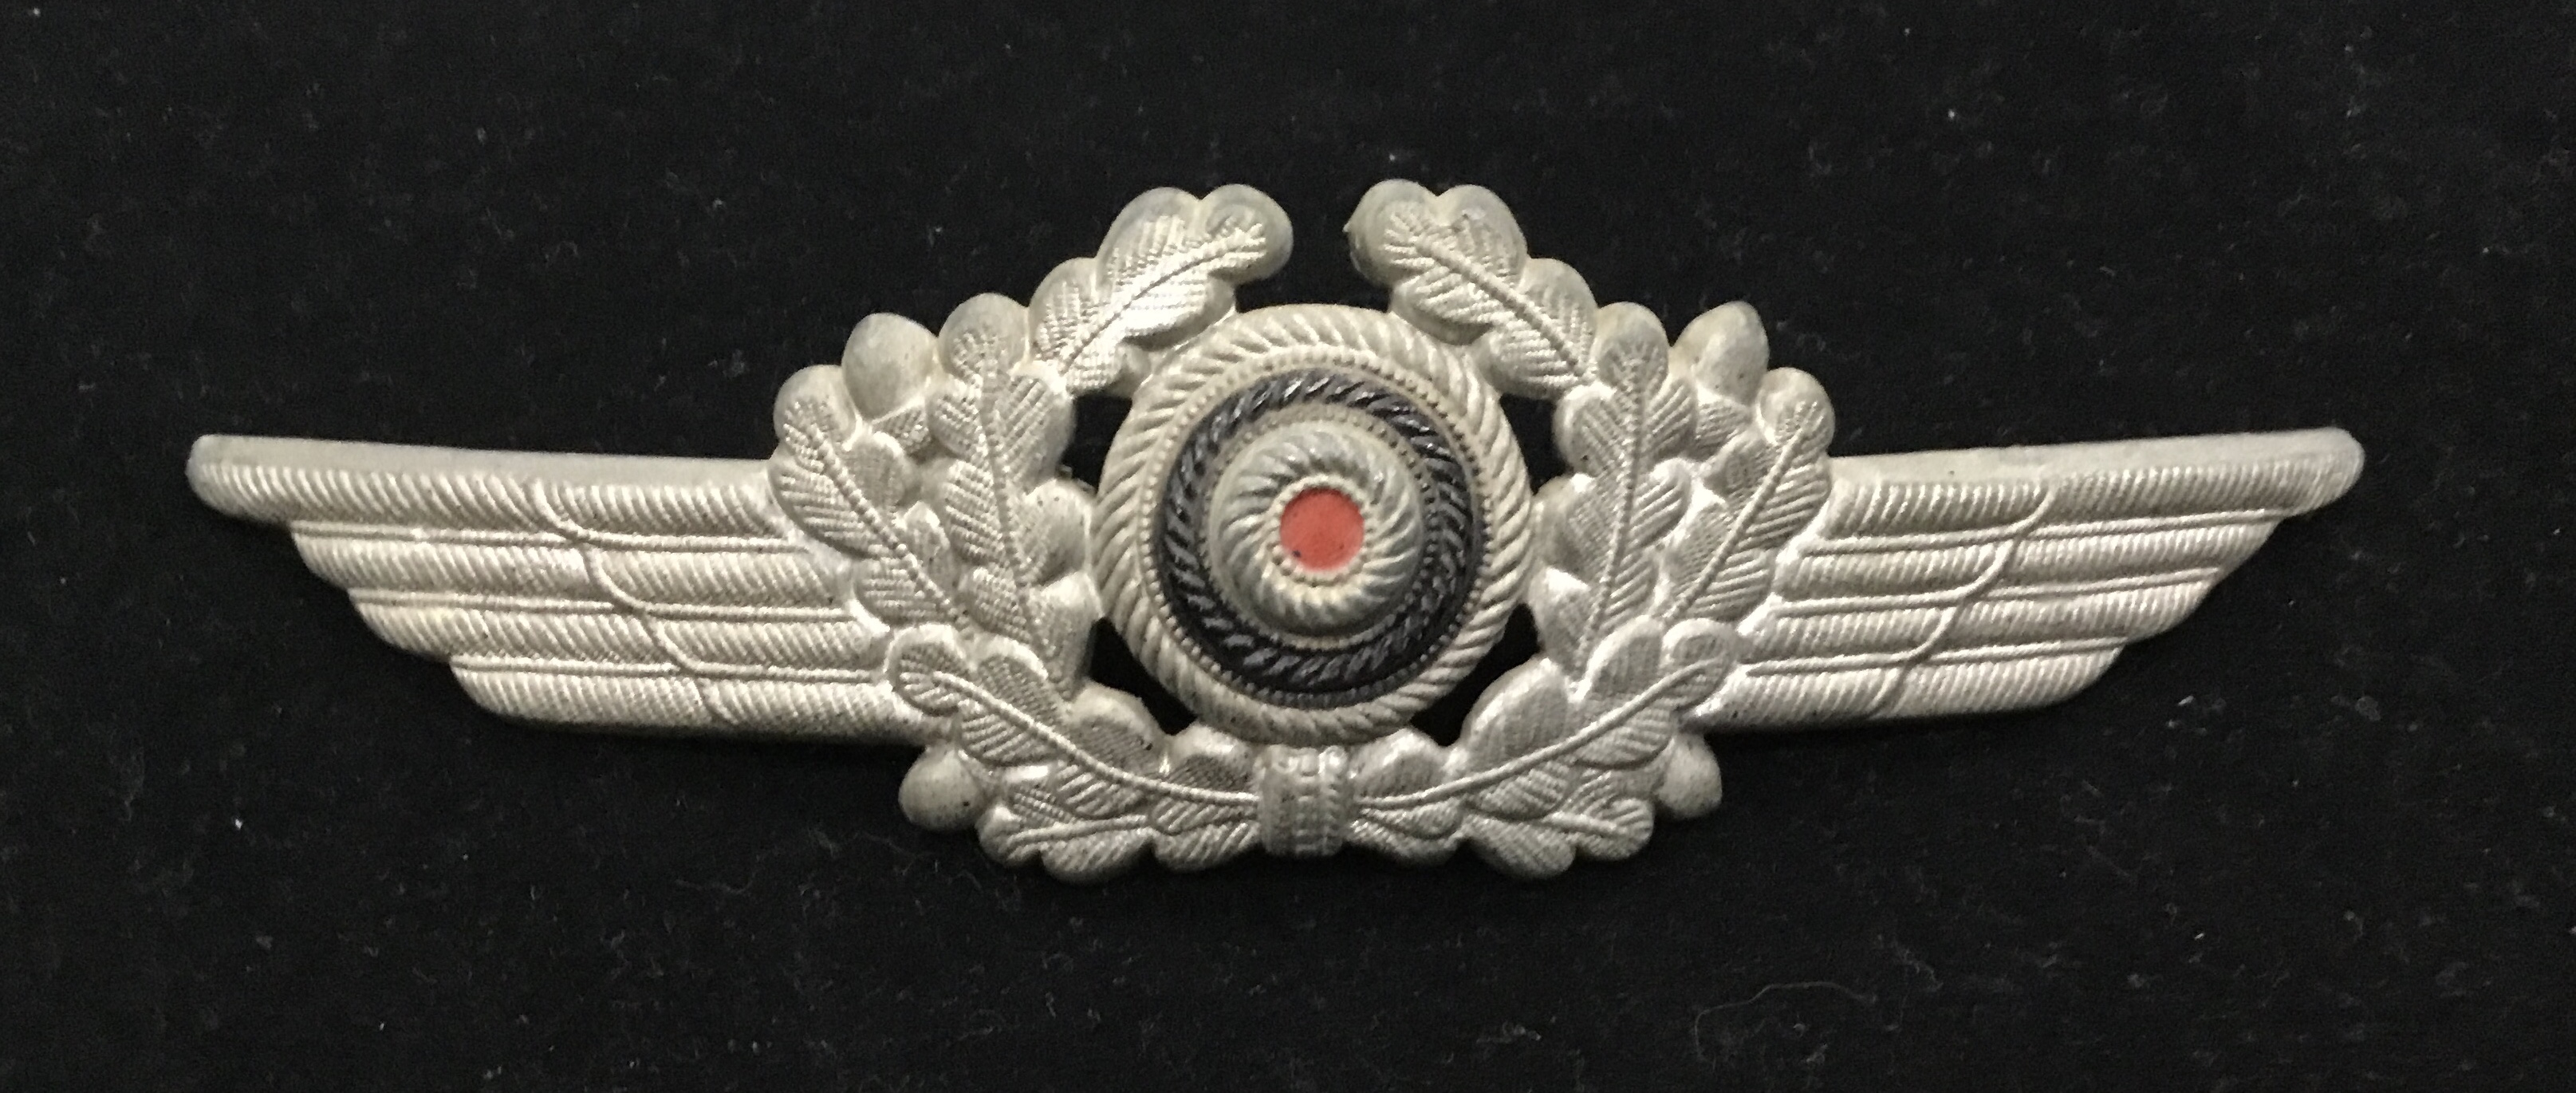 2 Ww2 Luftwaffe officers metal visor badges. Both with painted cockade area, flanked by die - Image 2 of 9